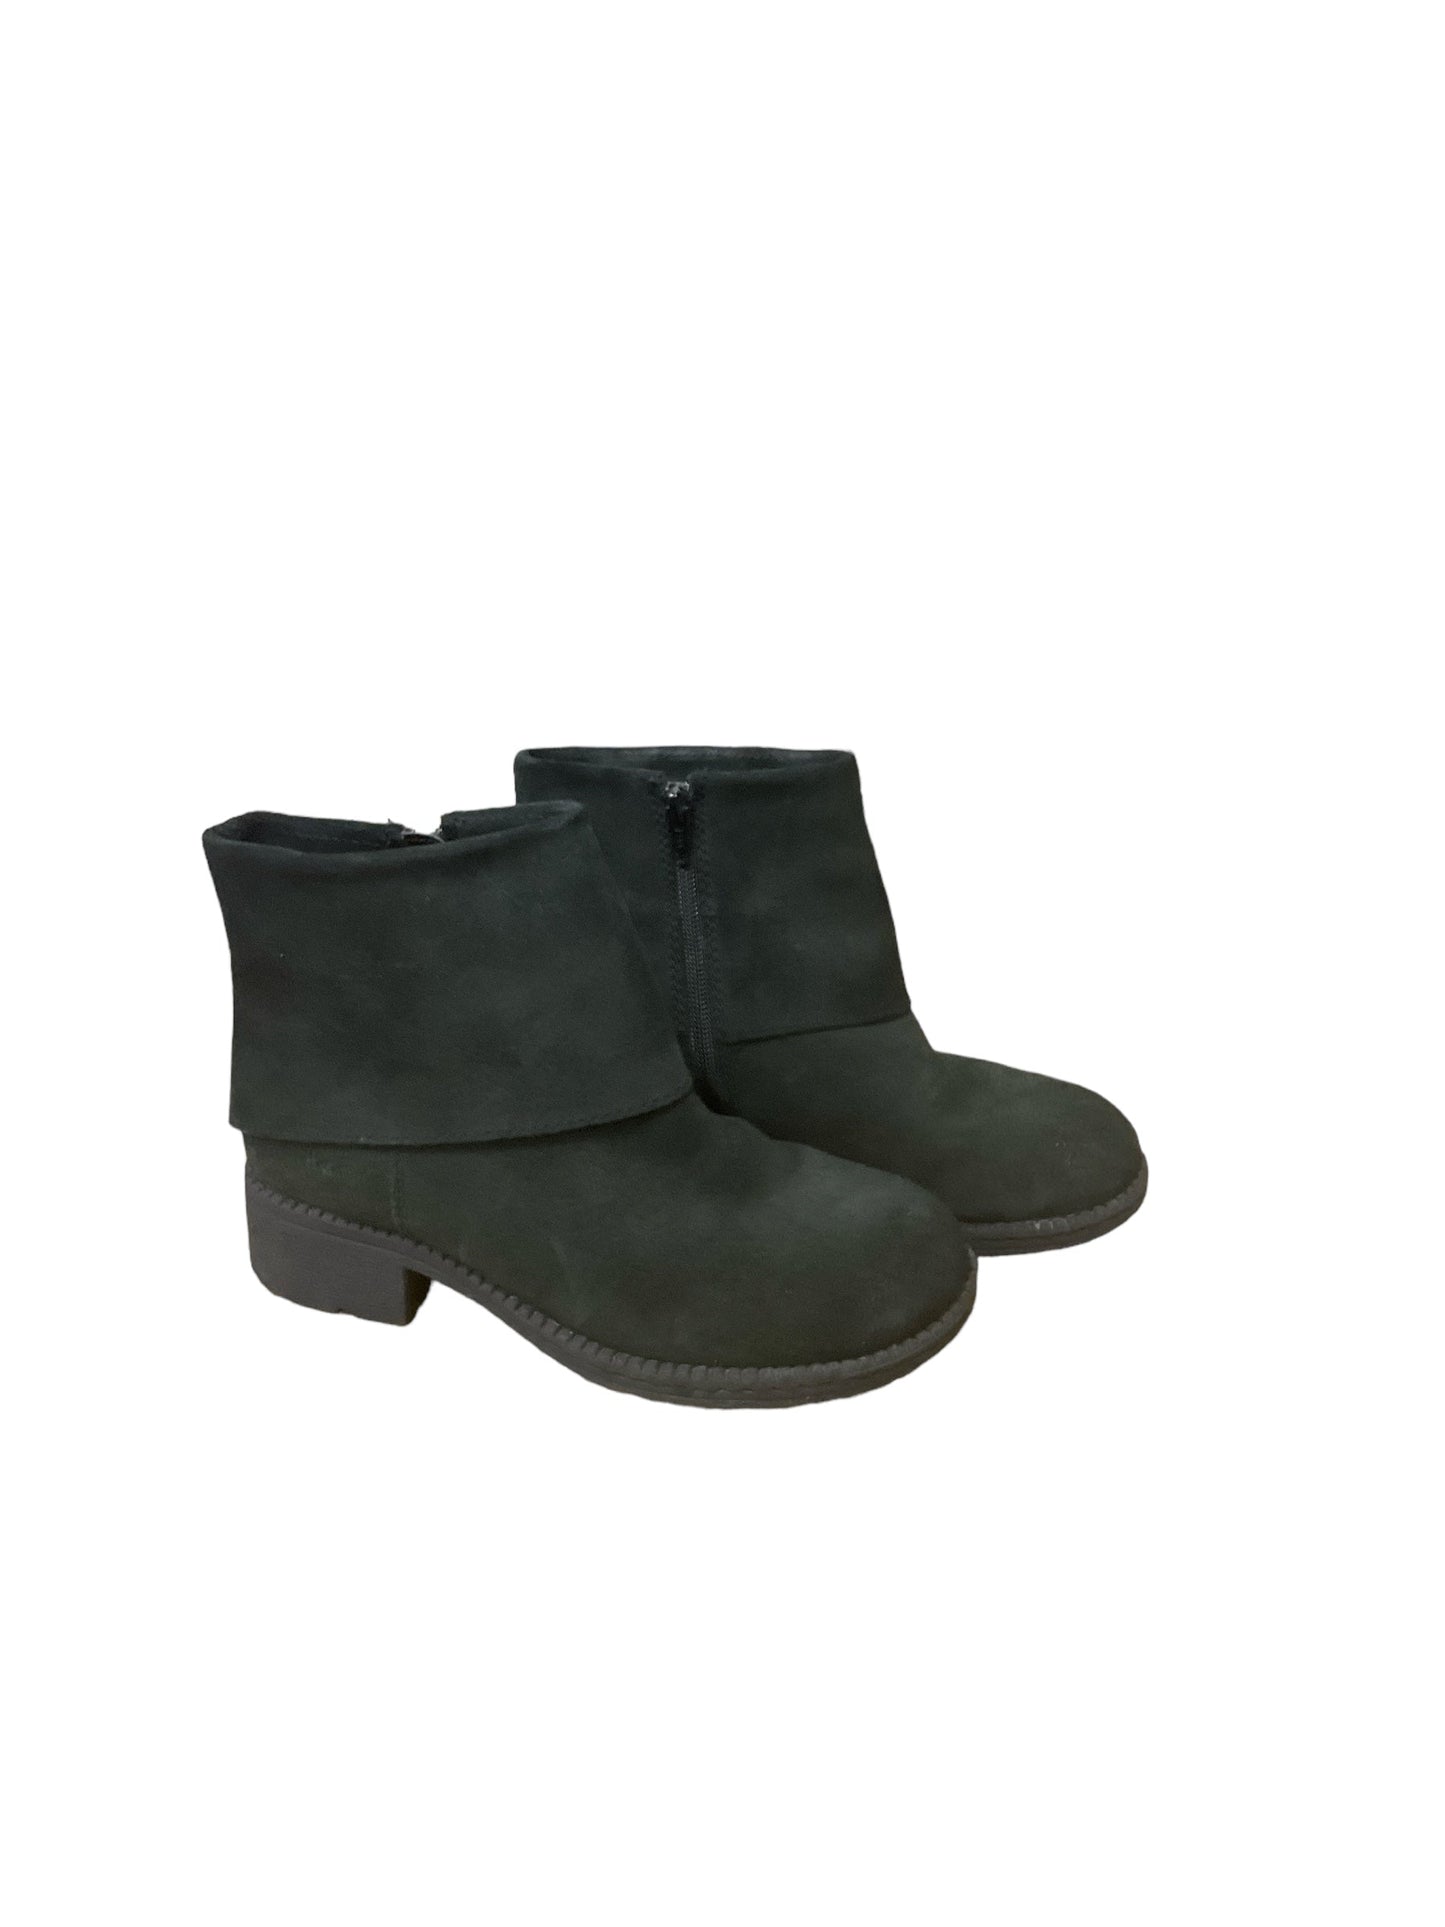 Boots Ankle Heels By Boc  Size: 6.5